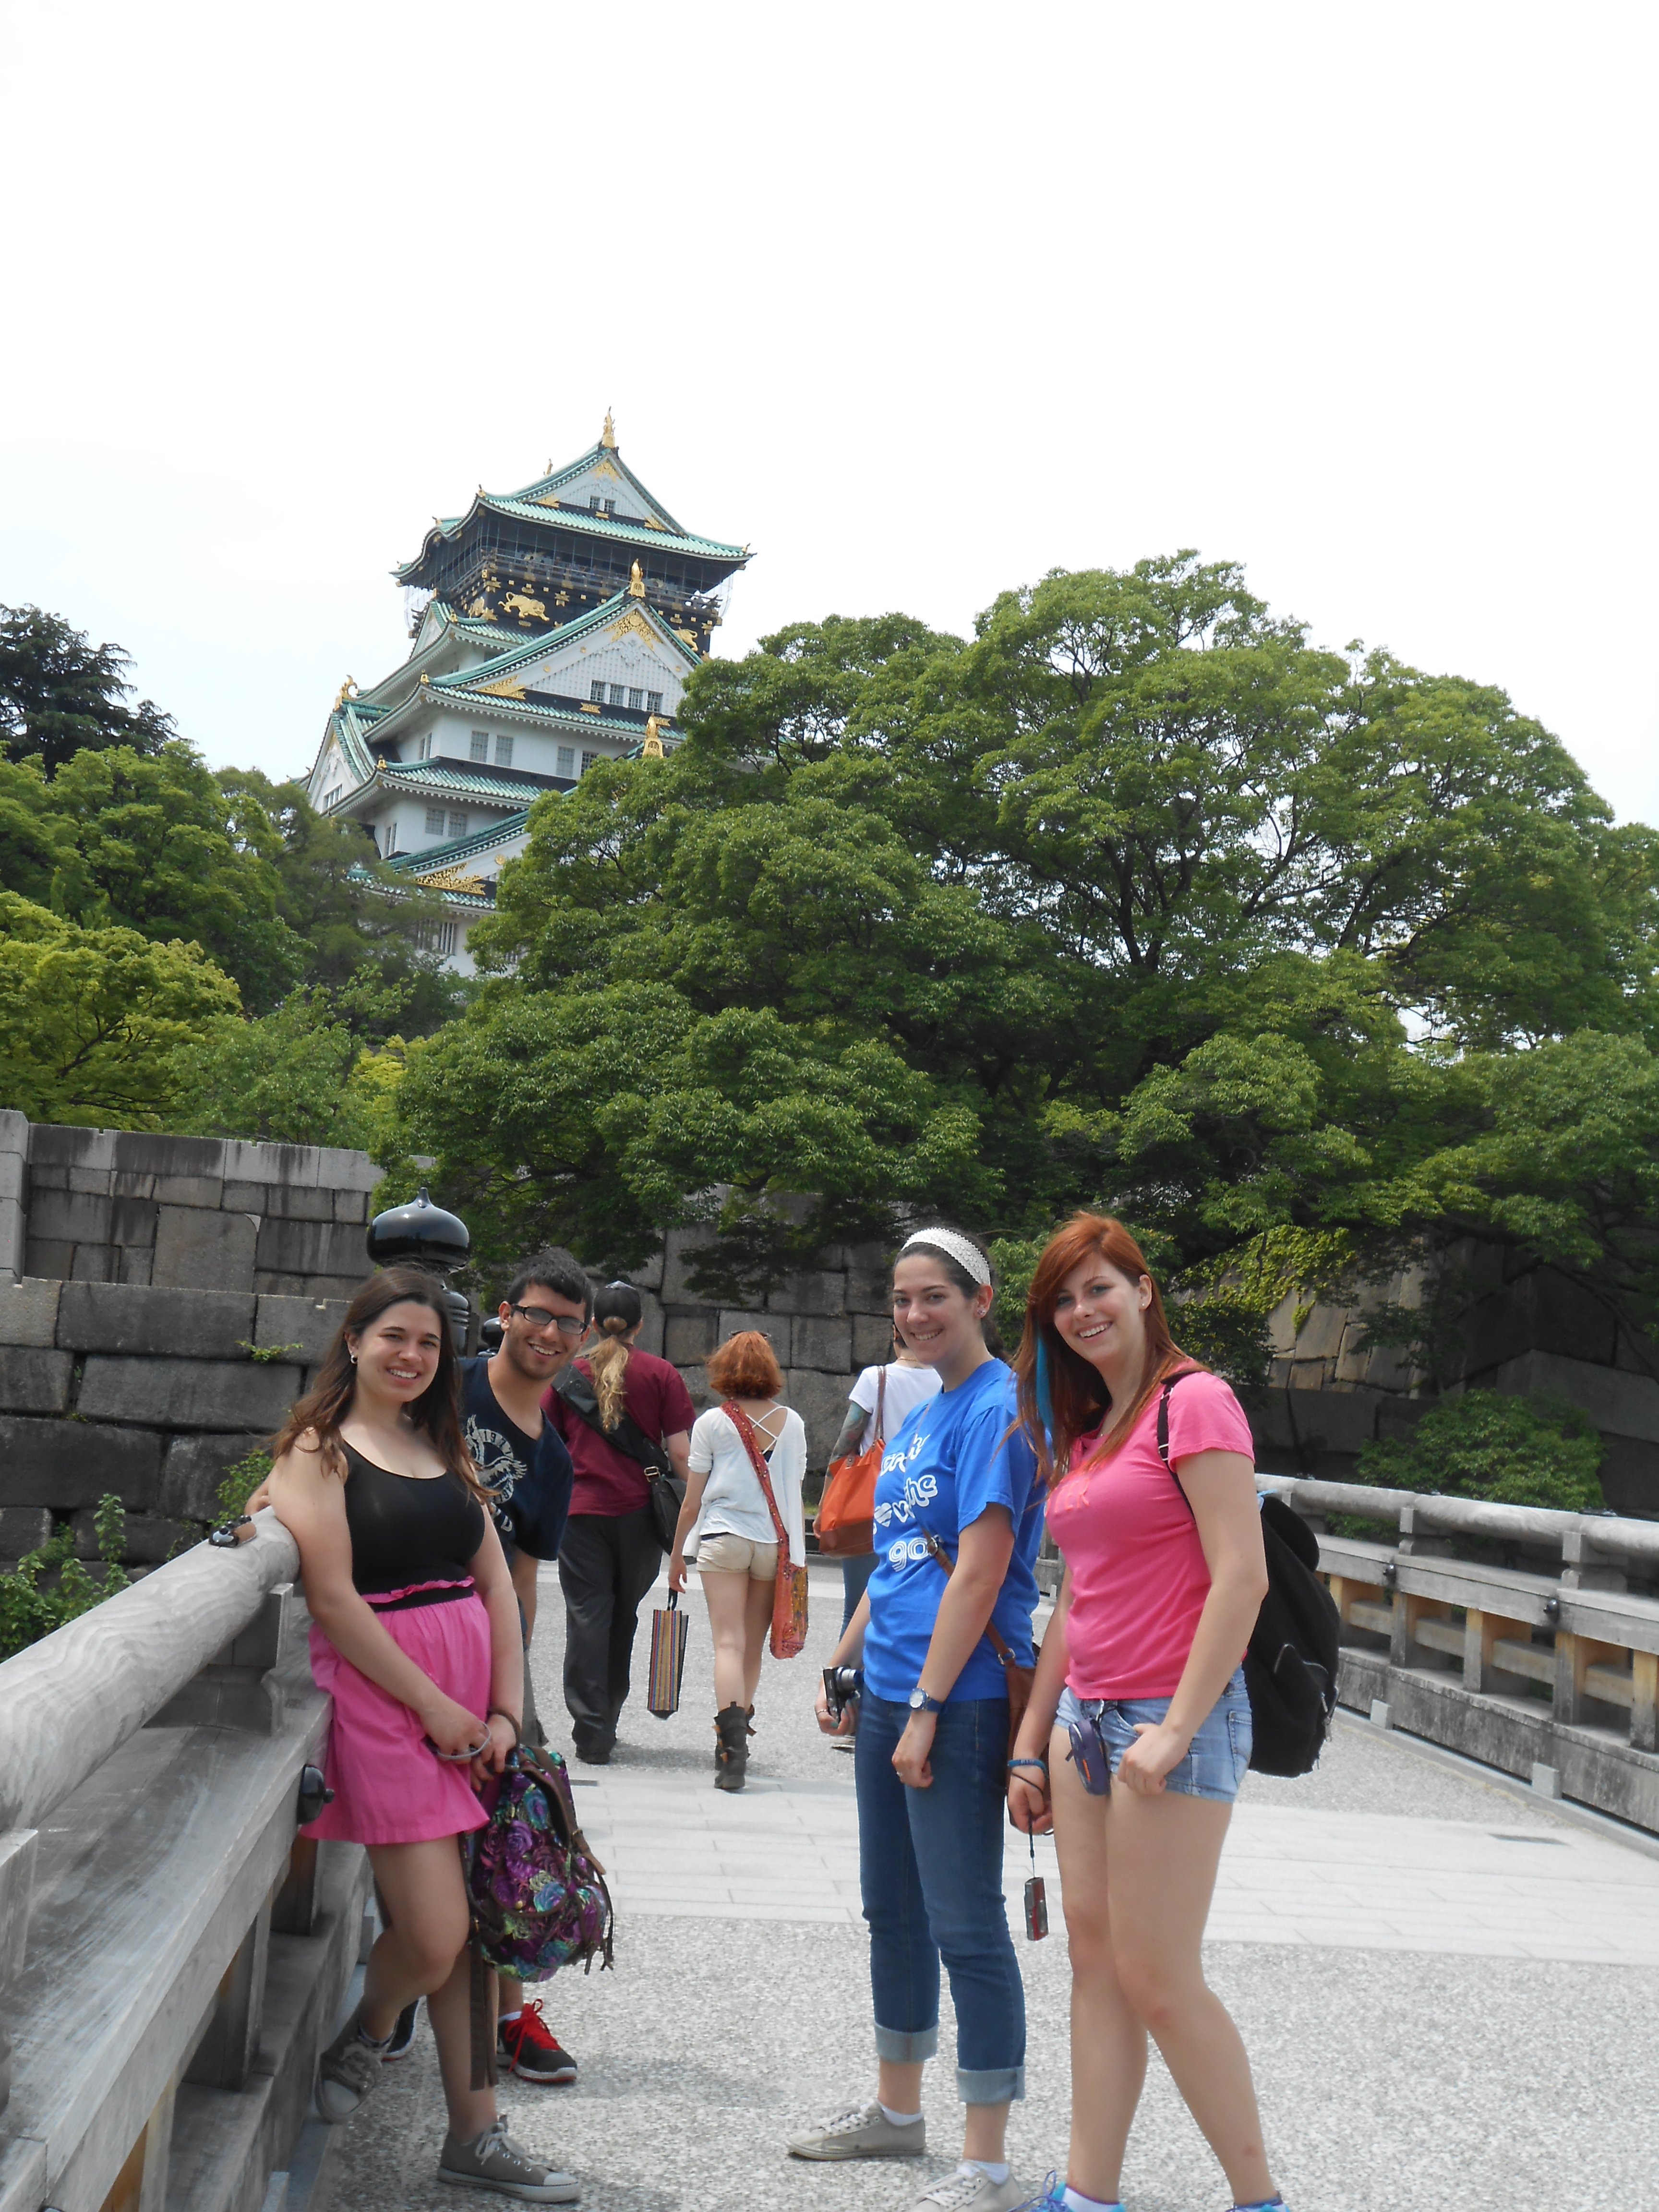 Students on bridge in front of Japanese castle